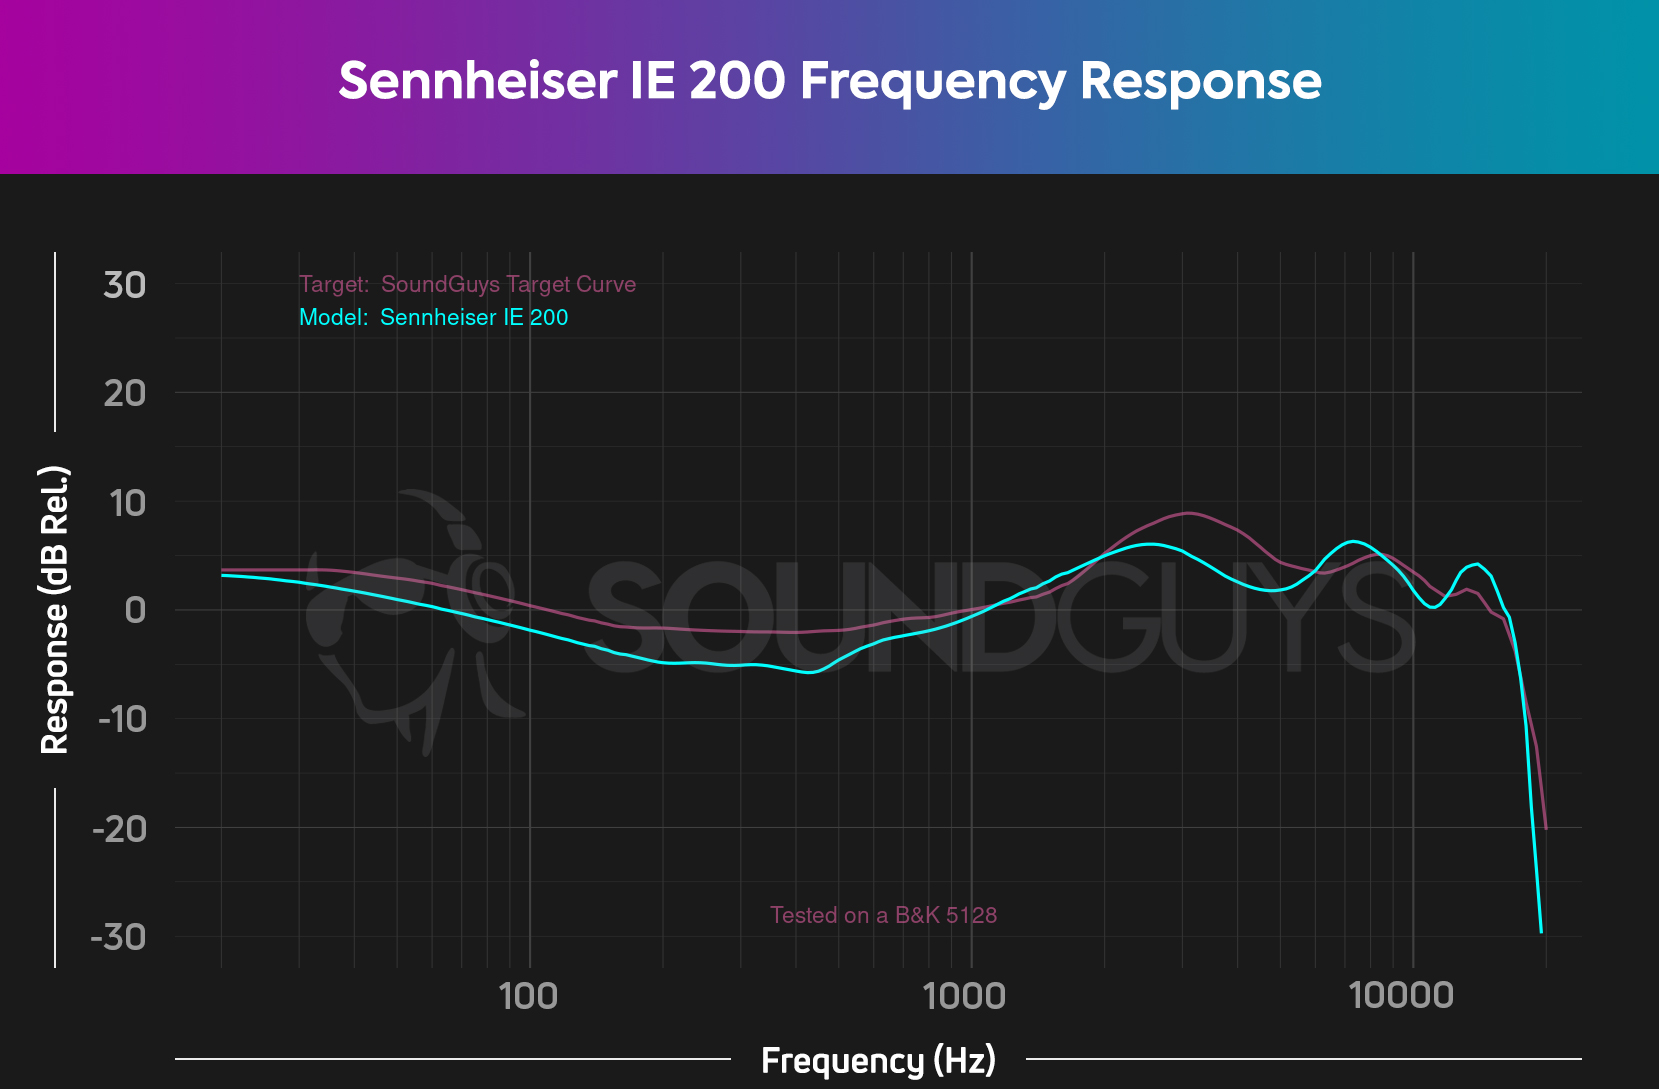 A chart shows the frequency response of the Sennheiser IE 200 using the silicone ear tips compared to our target curve.